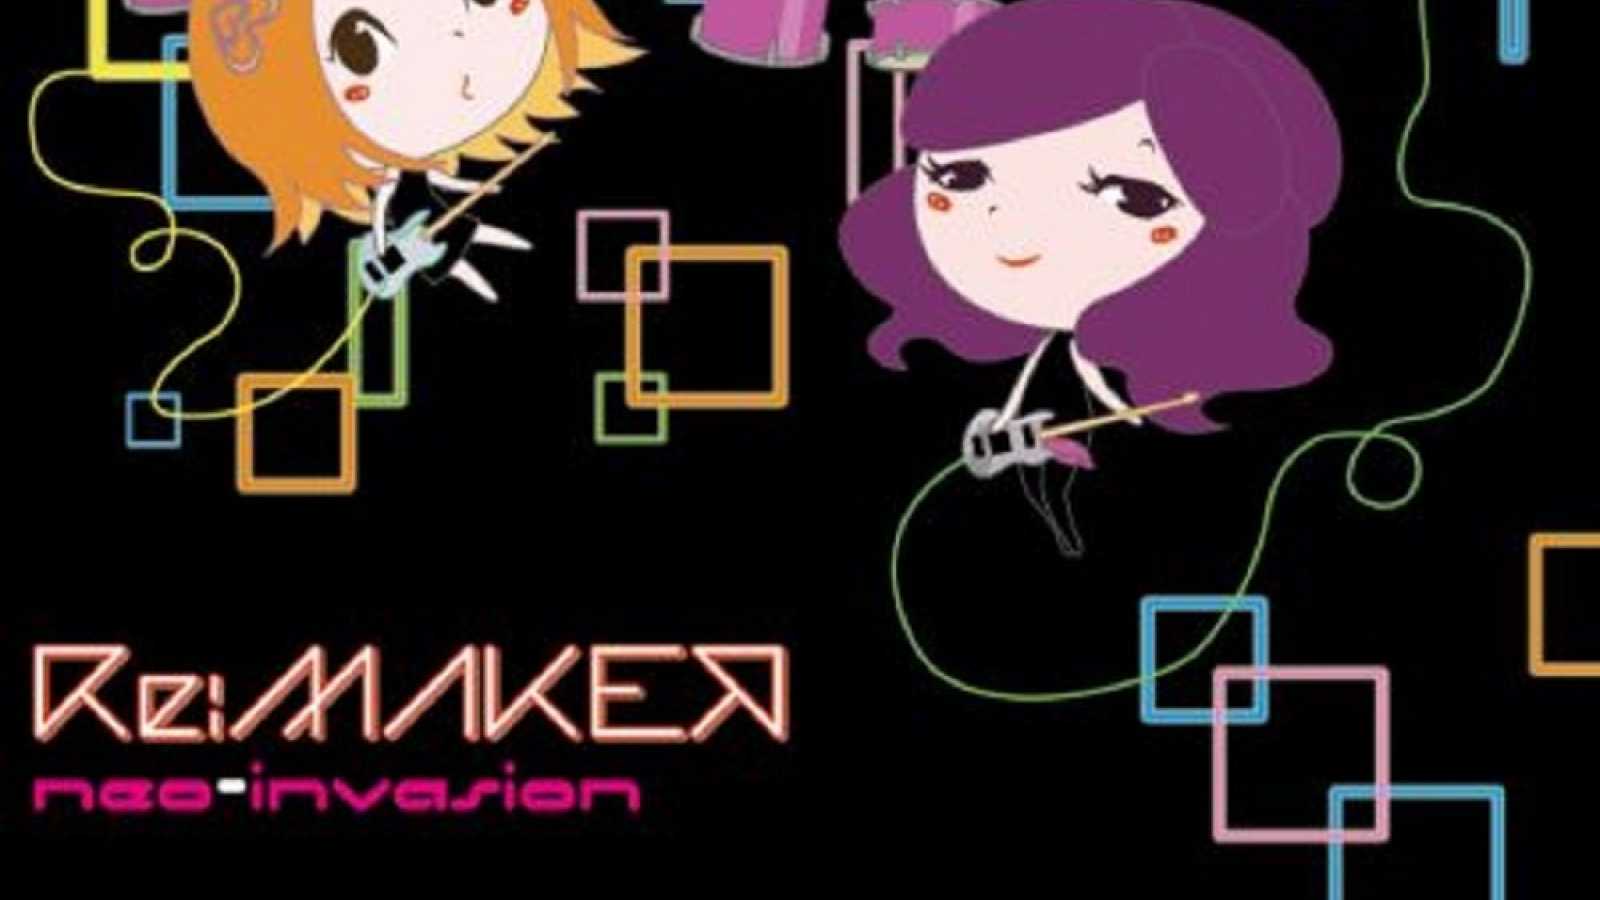 Re:MAKER - neo-invasion © FATE GEAR. All rights reserved.